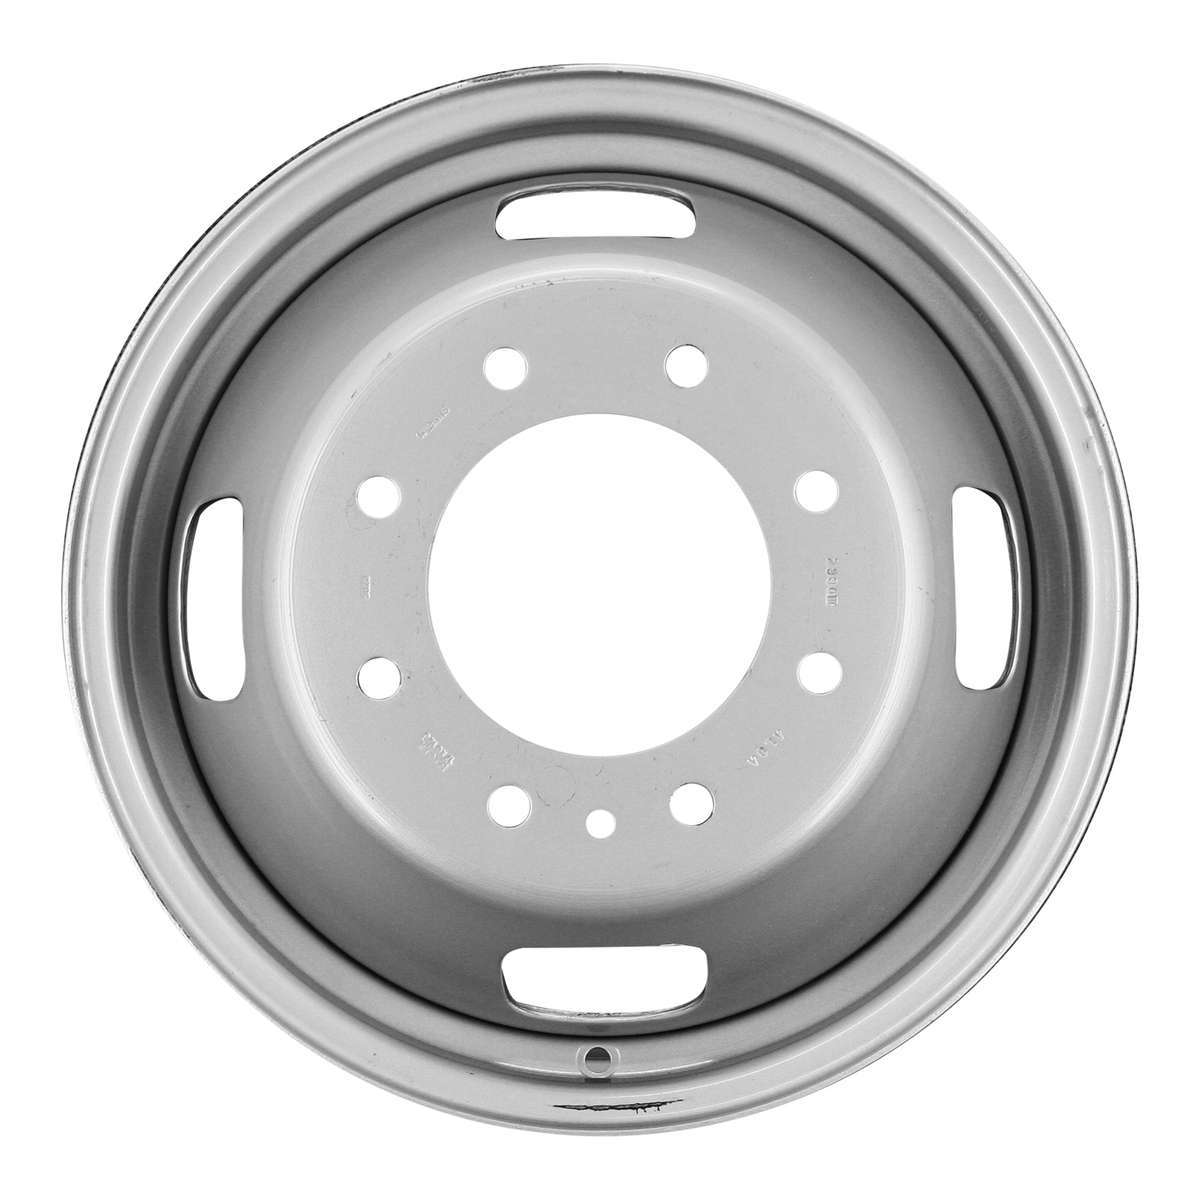 2019 Ford F-350 New 17" Replacement Wheel Rim RW3615S